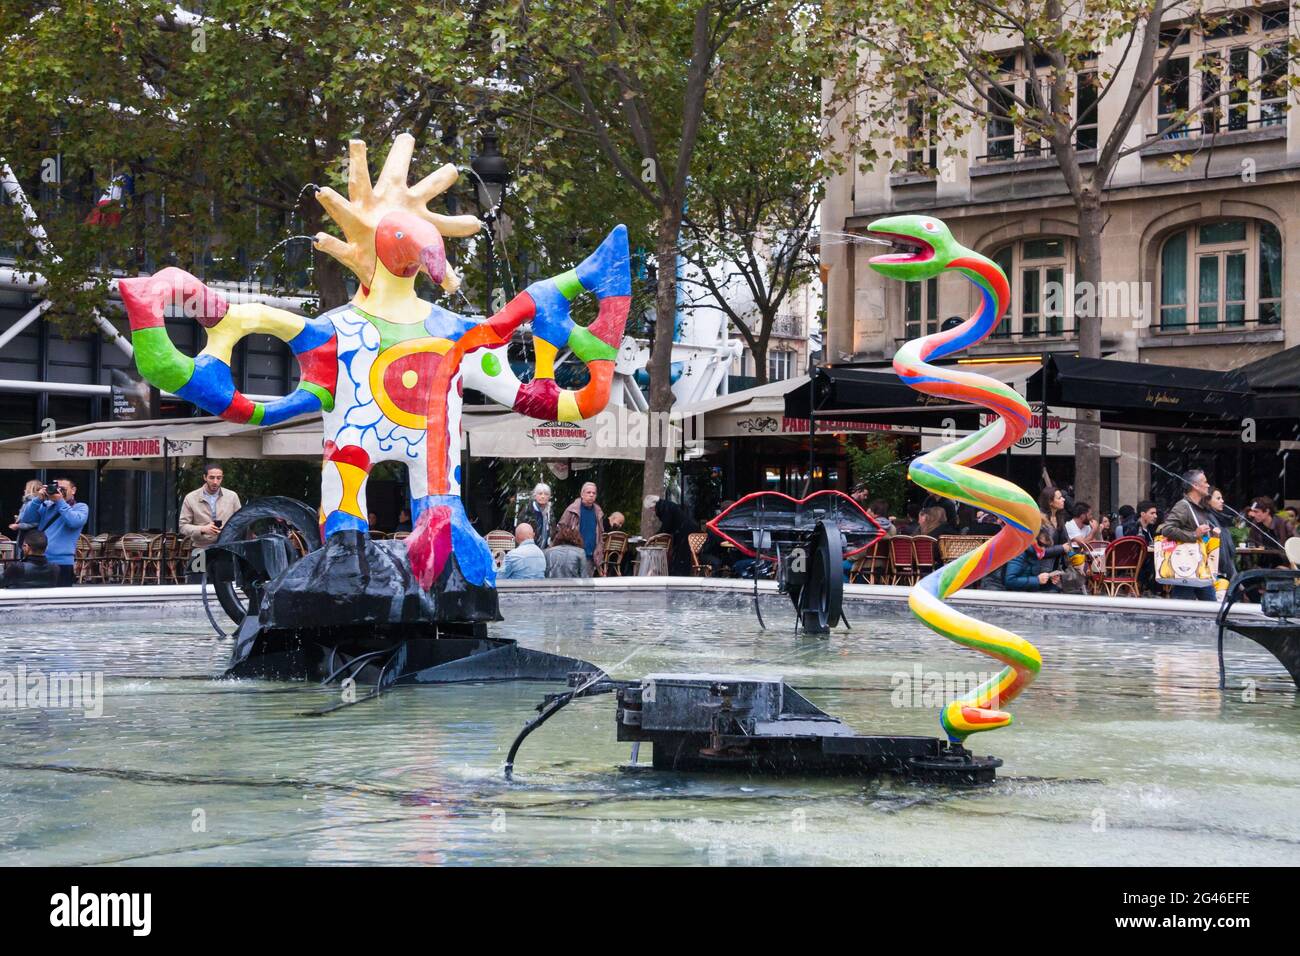 Paris, France Oct 9 2015: The Stravinsky Fountain with colorful whimsical sculptures spraying water. This is a work inspired by Igor Stravinsky and a Stock Photo